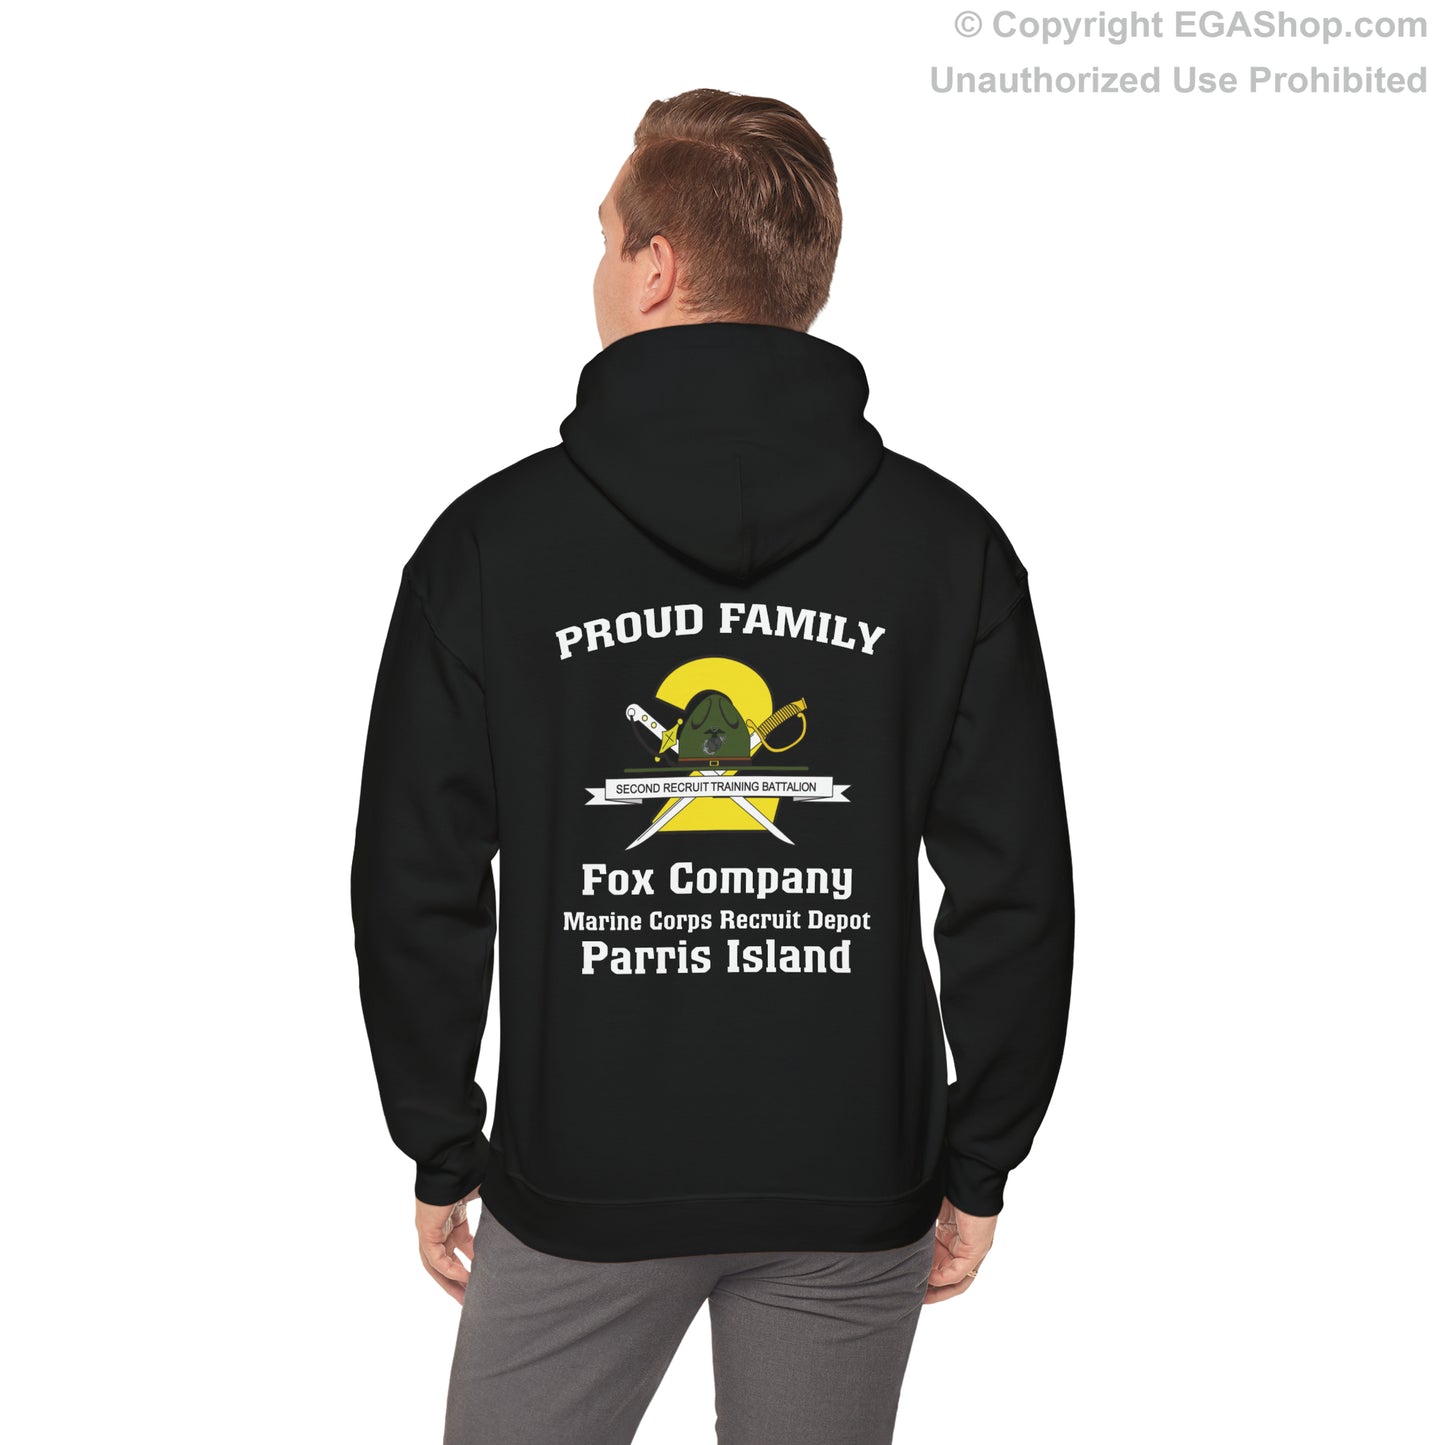 Hoodie: Fox Co. MCRD Parris Island (2nd Battalion Crest on BACK)